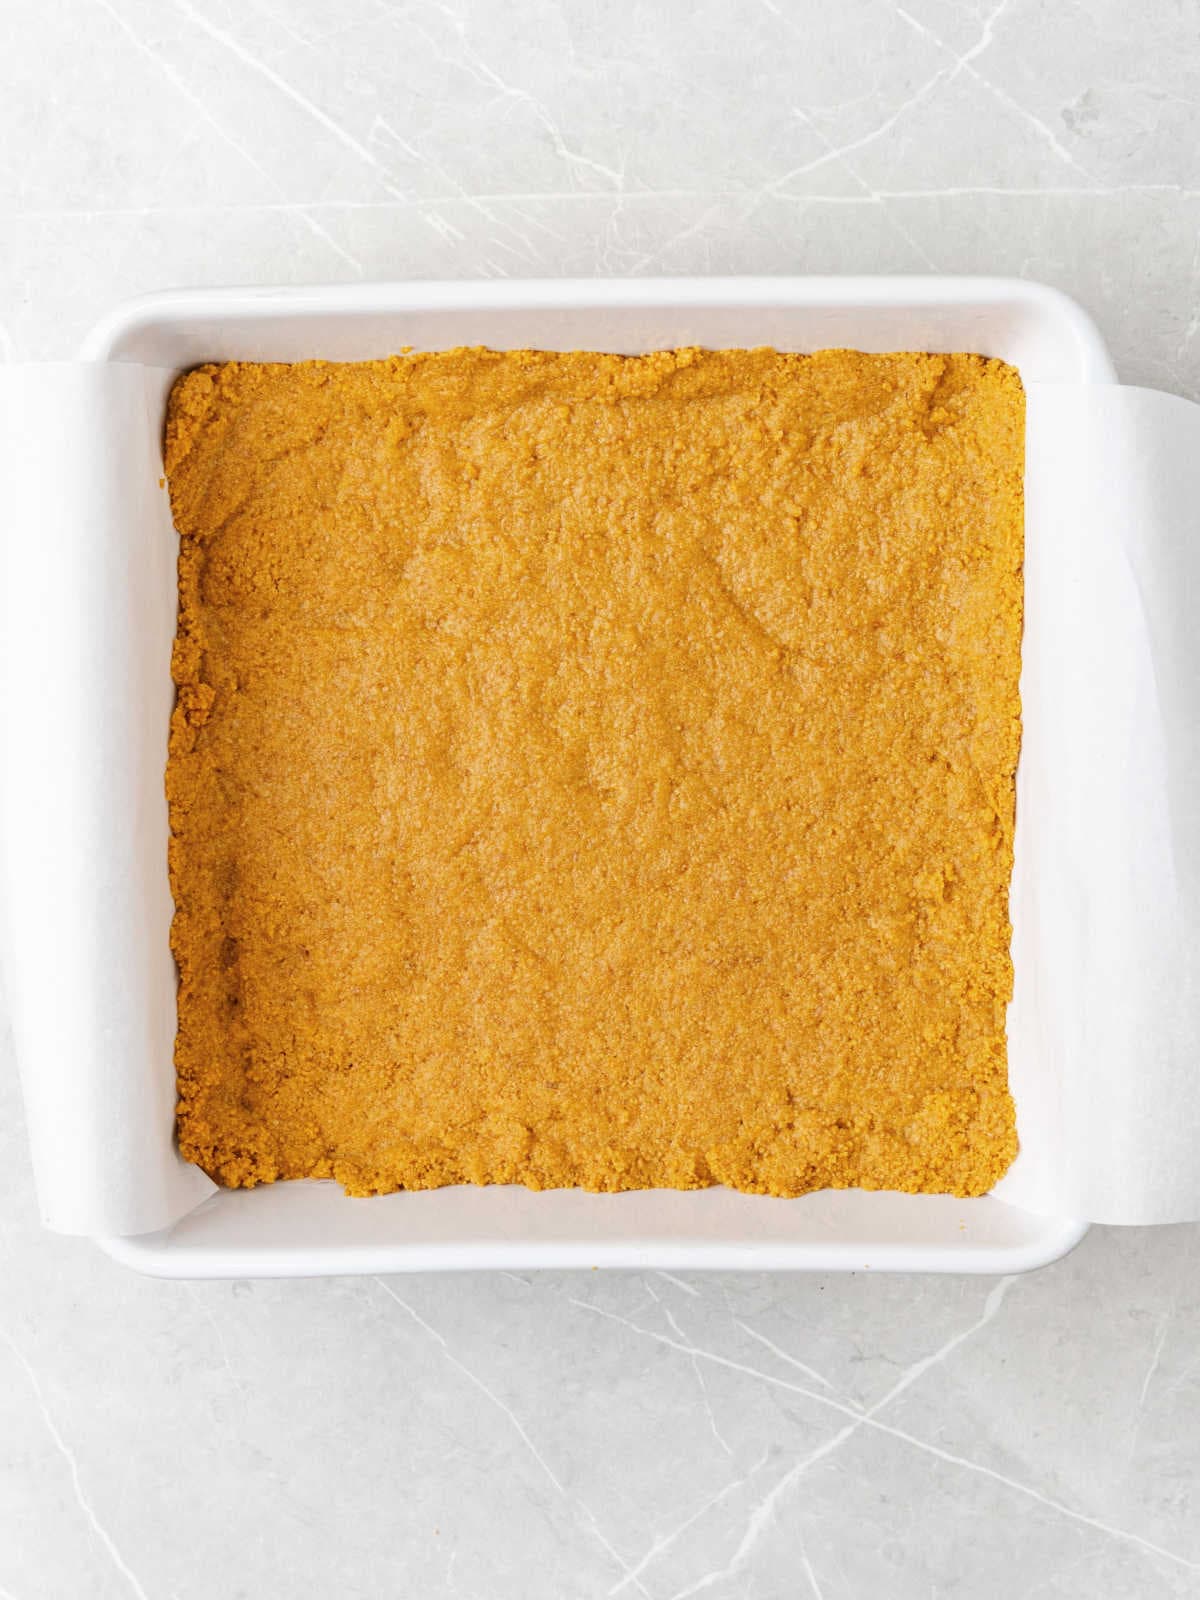 Baked graham cracker crust in a white ceramic pan on a light gray surface.